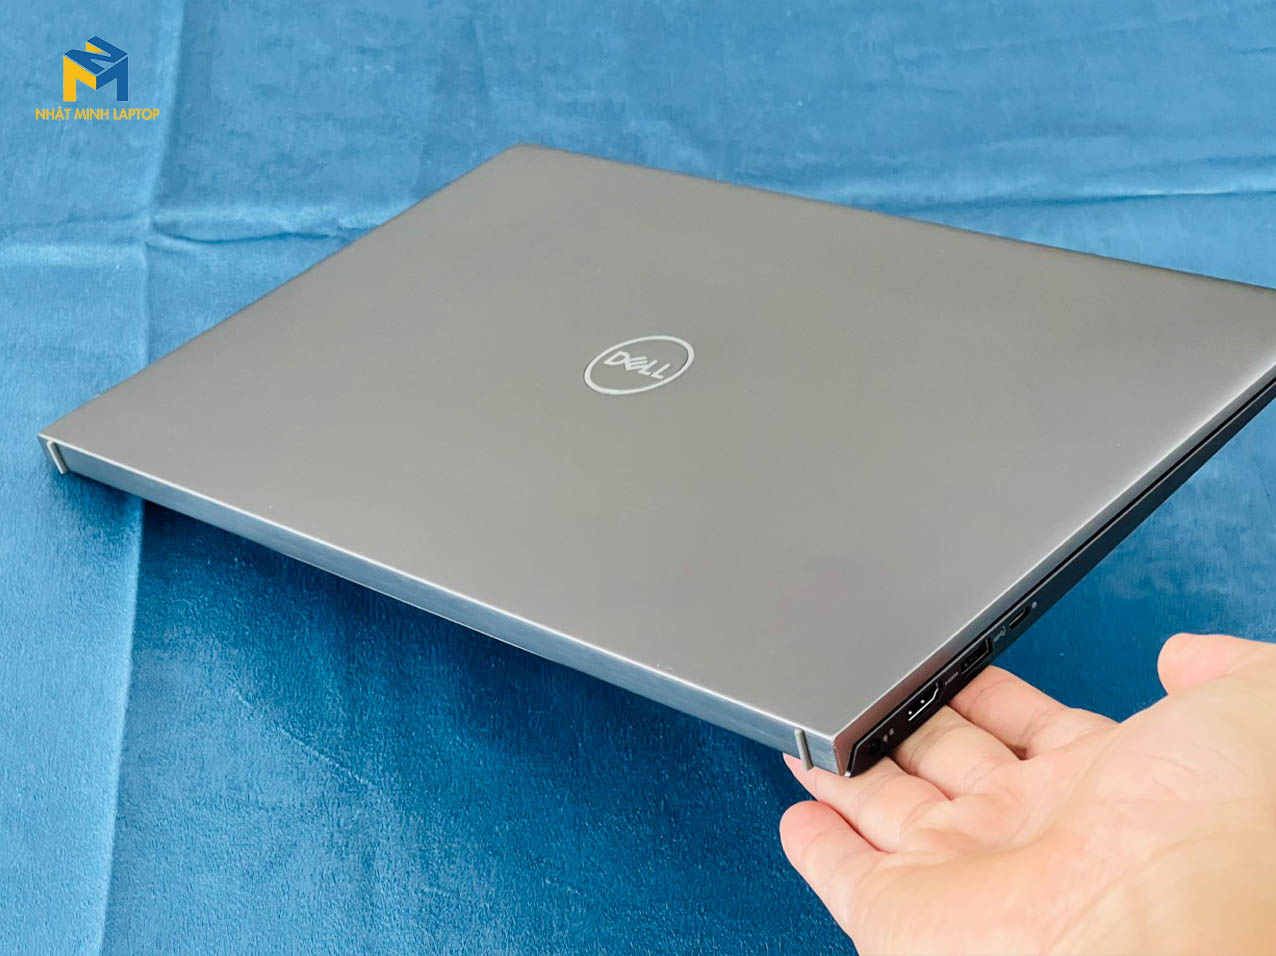 dell vostr9 5510 review